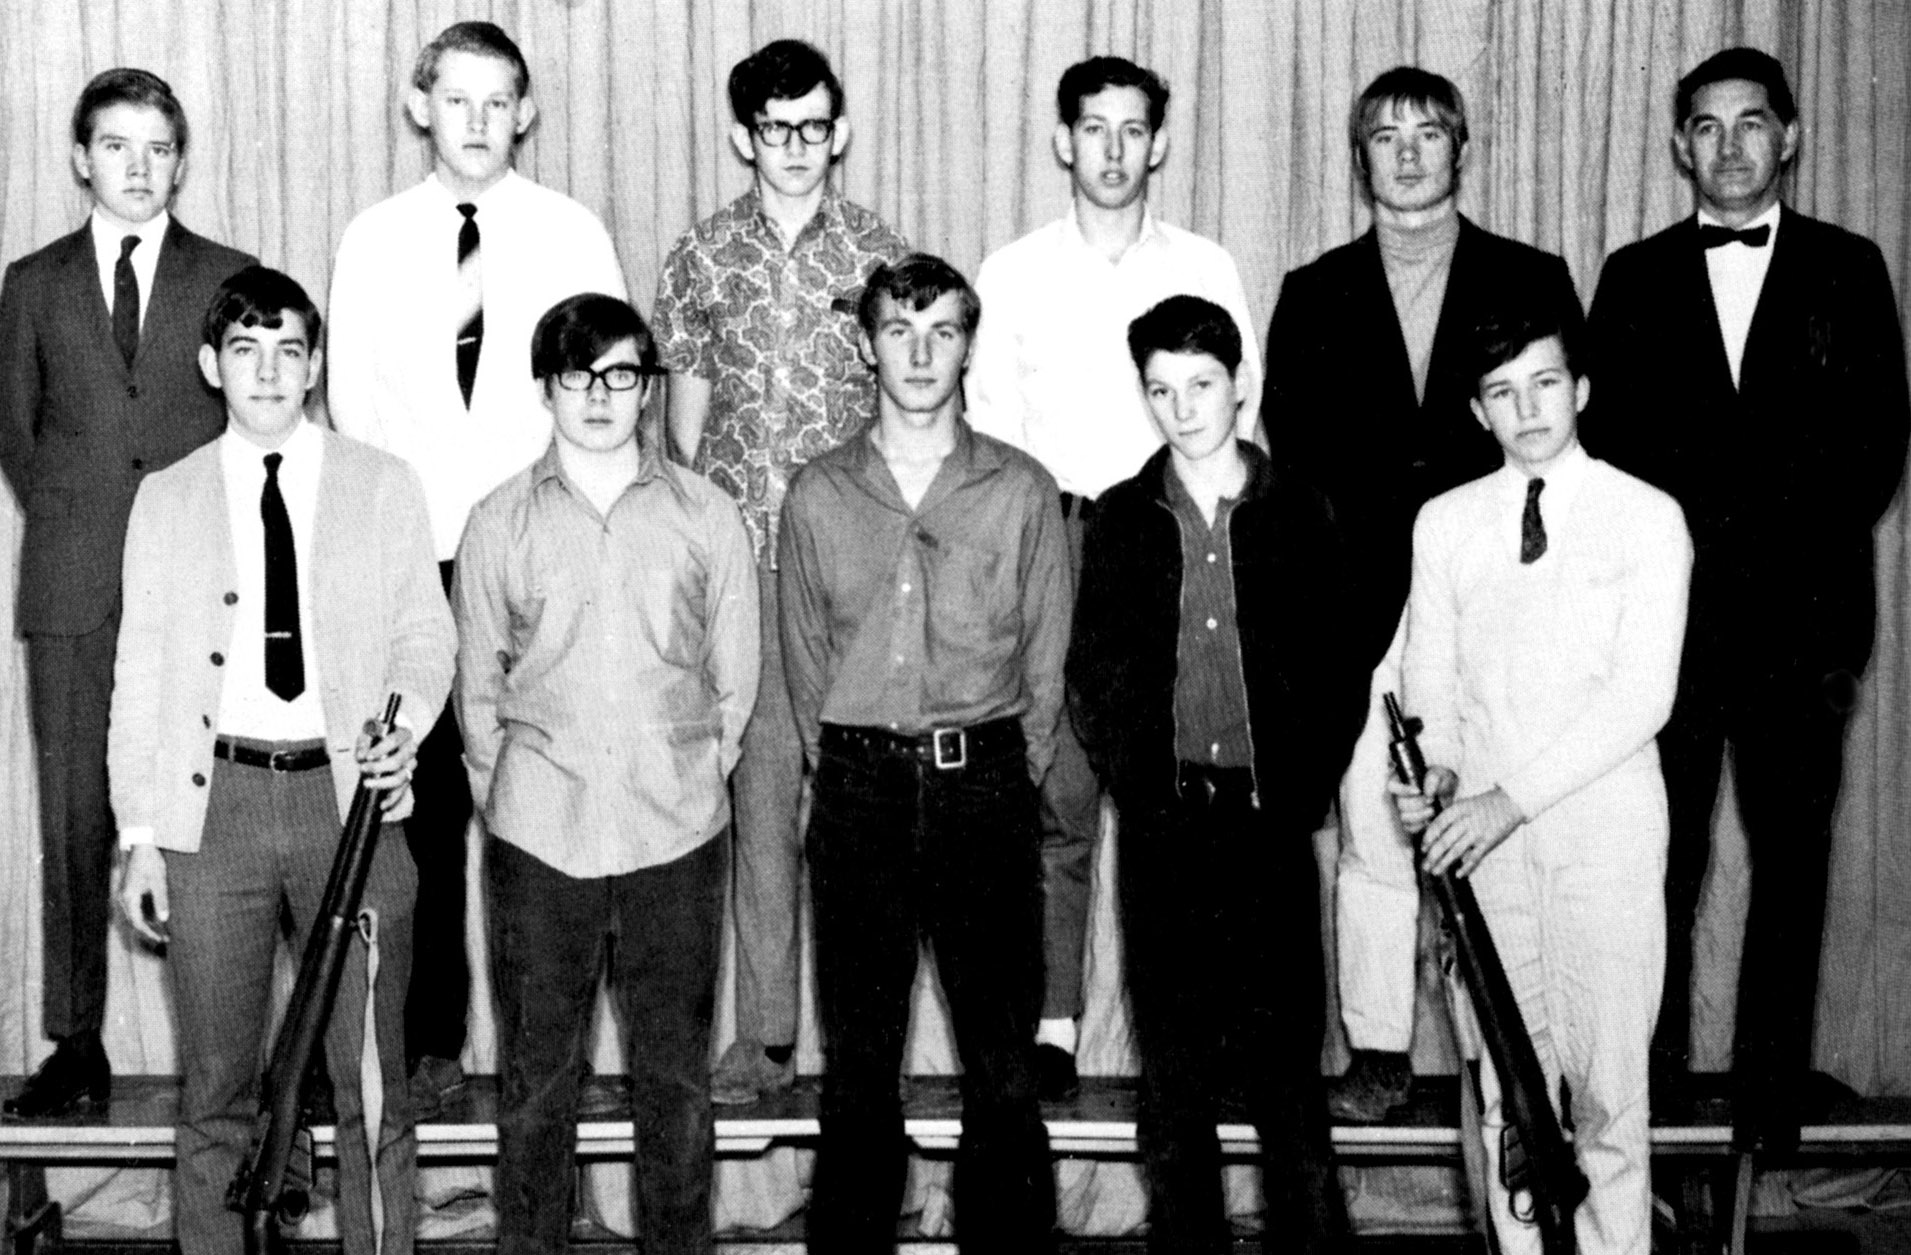 (Click to magnify) FRONT ROW: J. Howroyd, B. Carroll, G. Allbright, A. Riddle, P. Pearce; ***SECOND ROW: Alec Leask, G. Forsythe, D. Ball, R. Harrison, T. Watts, Mr. N. Brunne; ***ABSENT: Eric Blackburn, Bill Cellini, Brian Goodspeed.